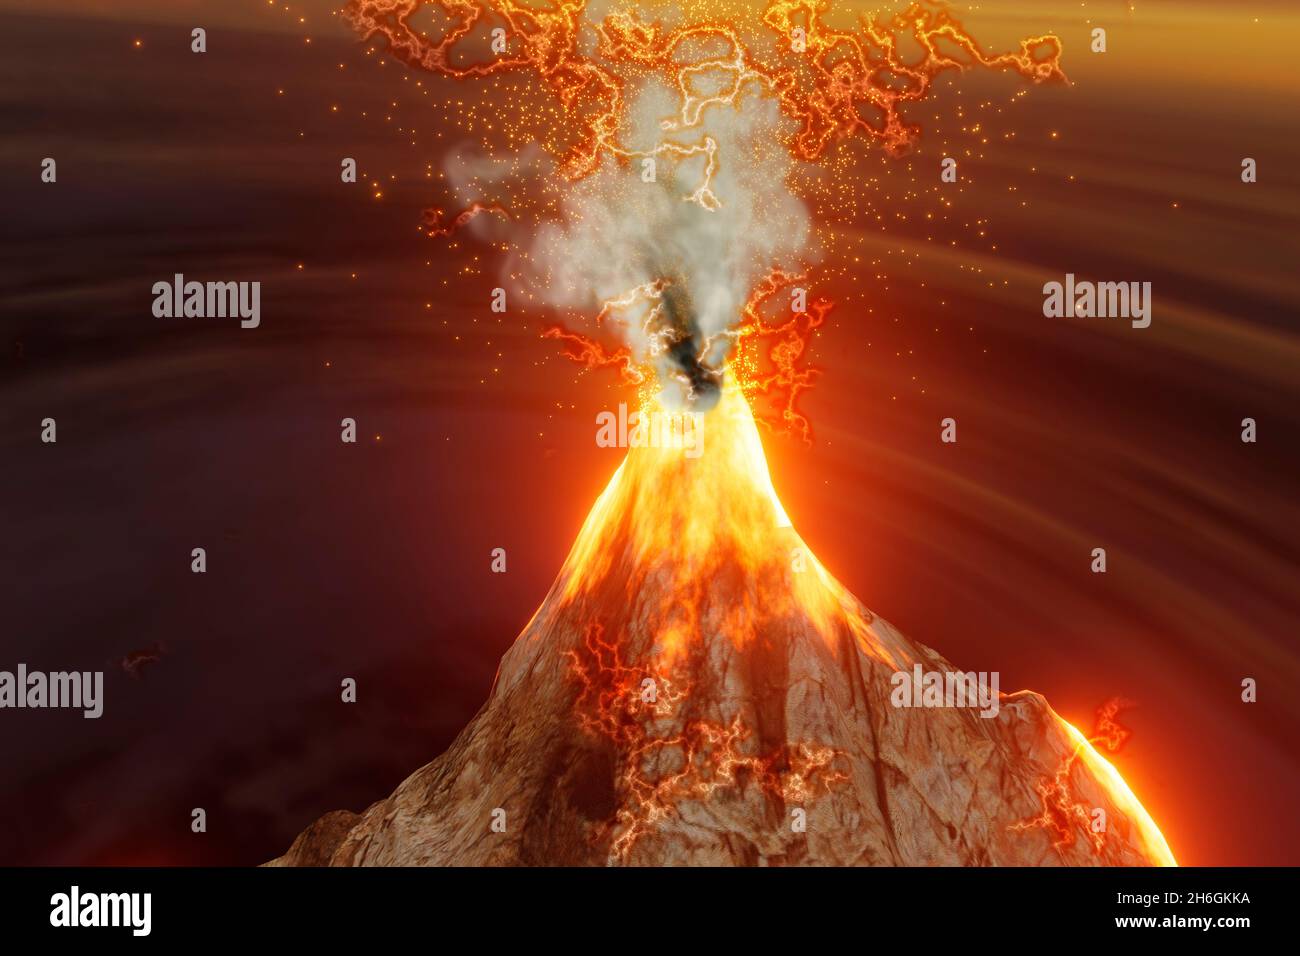 lightning electric storm at night with three-dimensional erupting volcano spewing lava, magma, gas, ash and plume of smoke dramatic endangered scene i Stock Photo